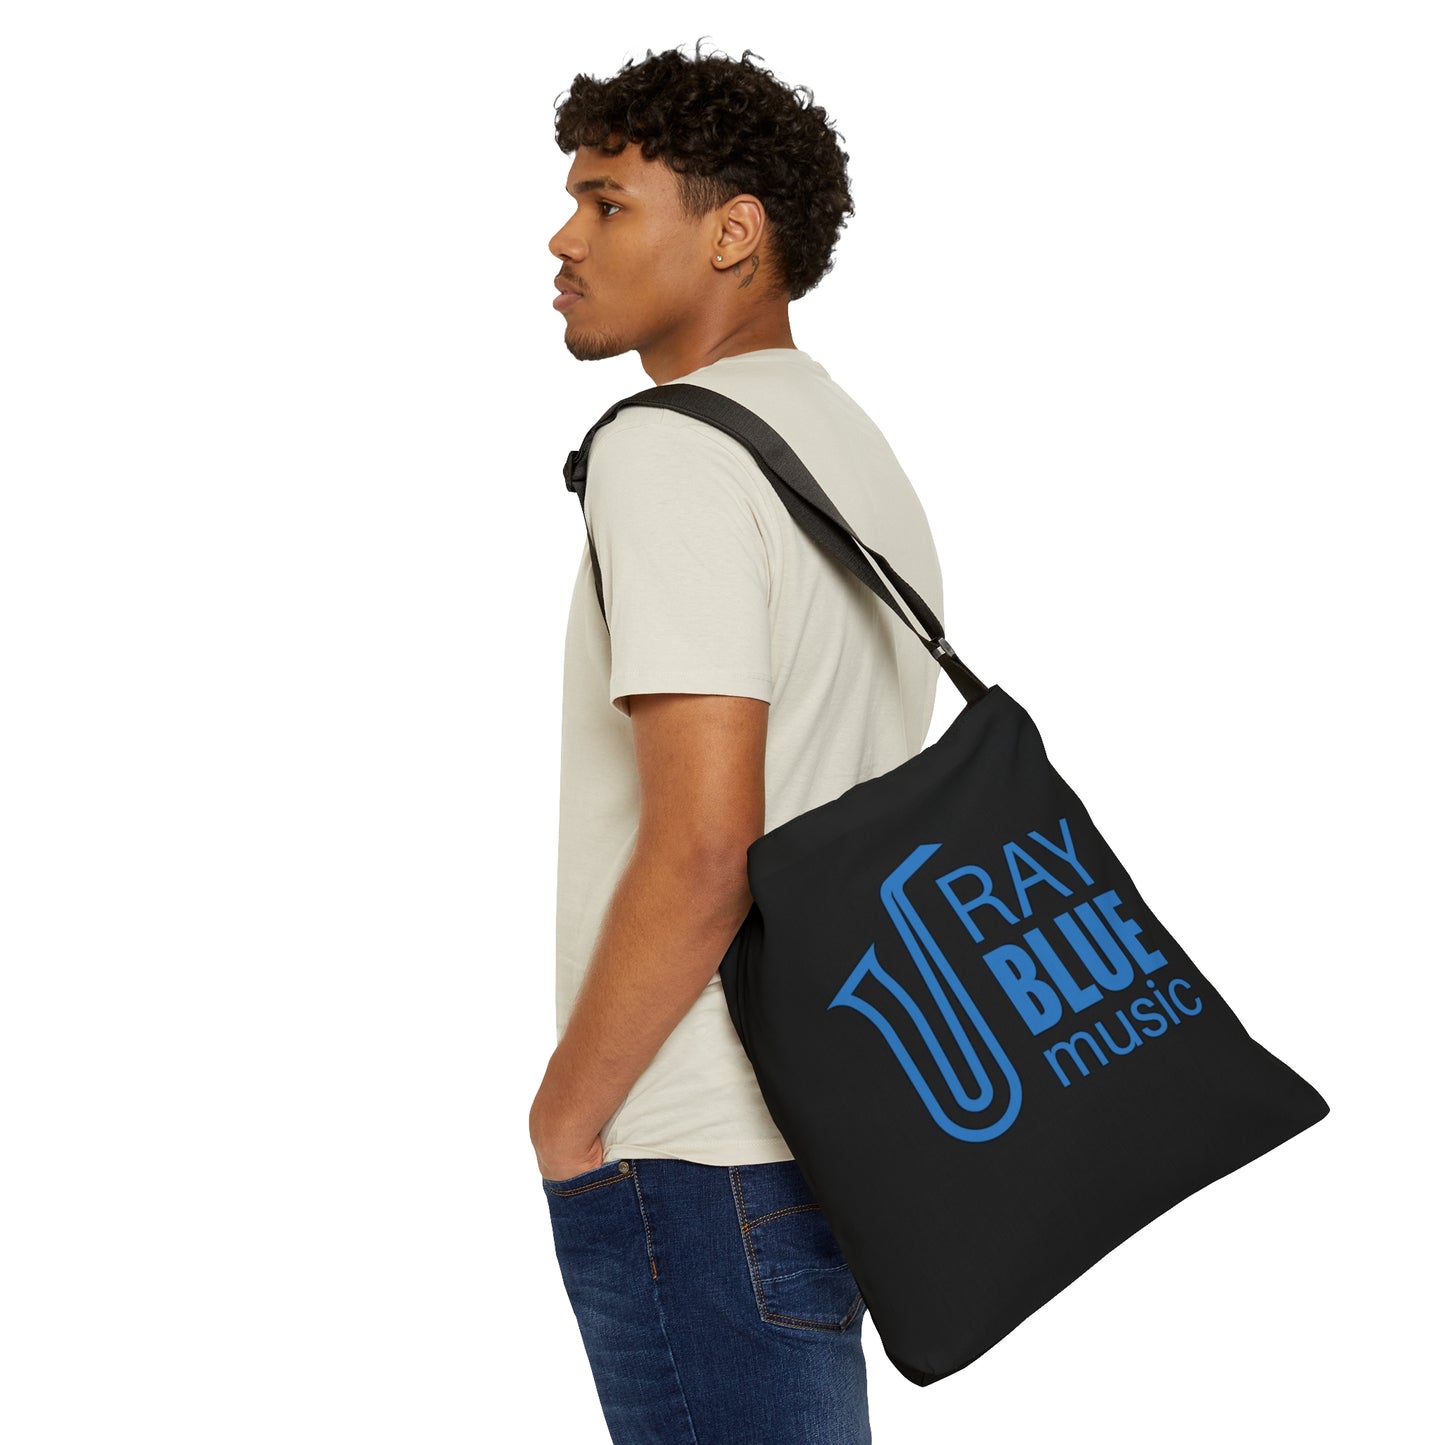 Ray Blue Music Tote